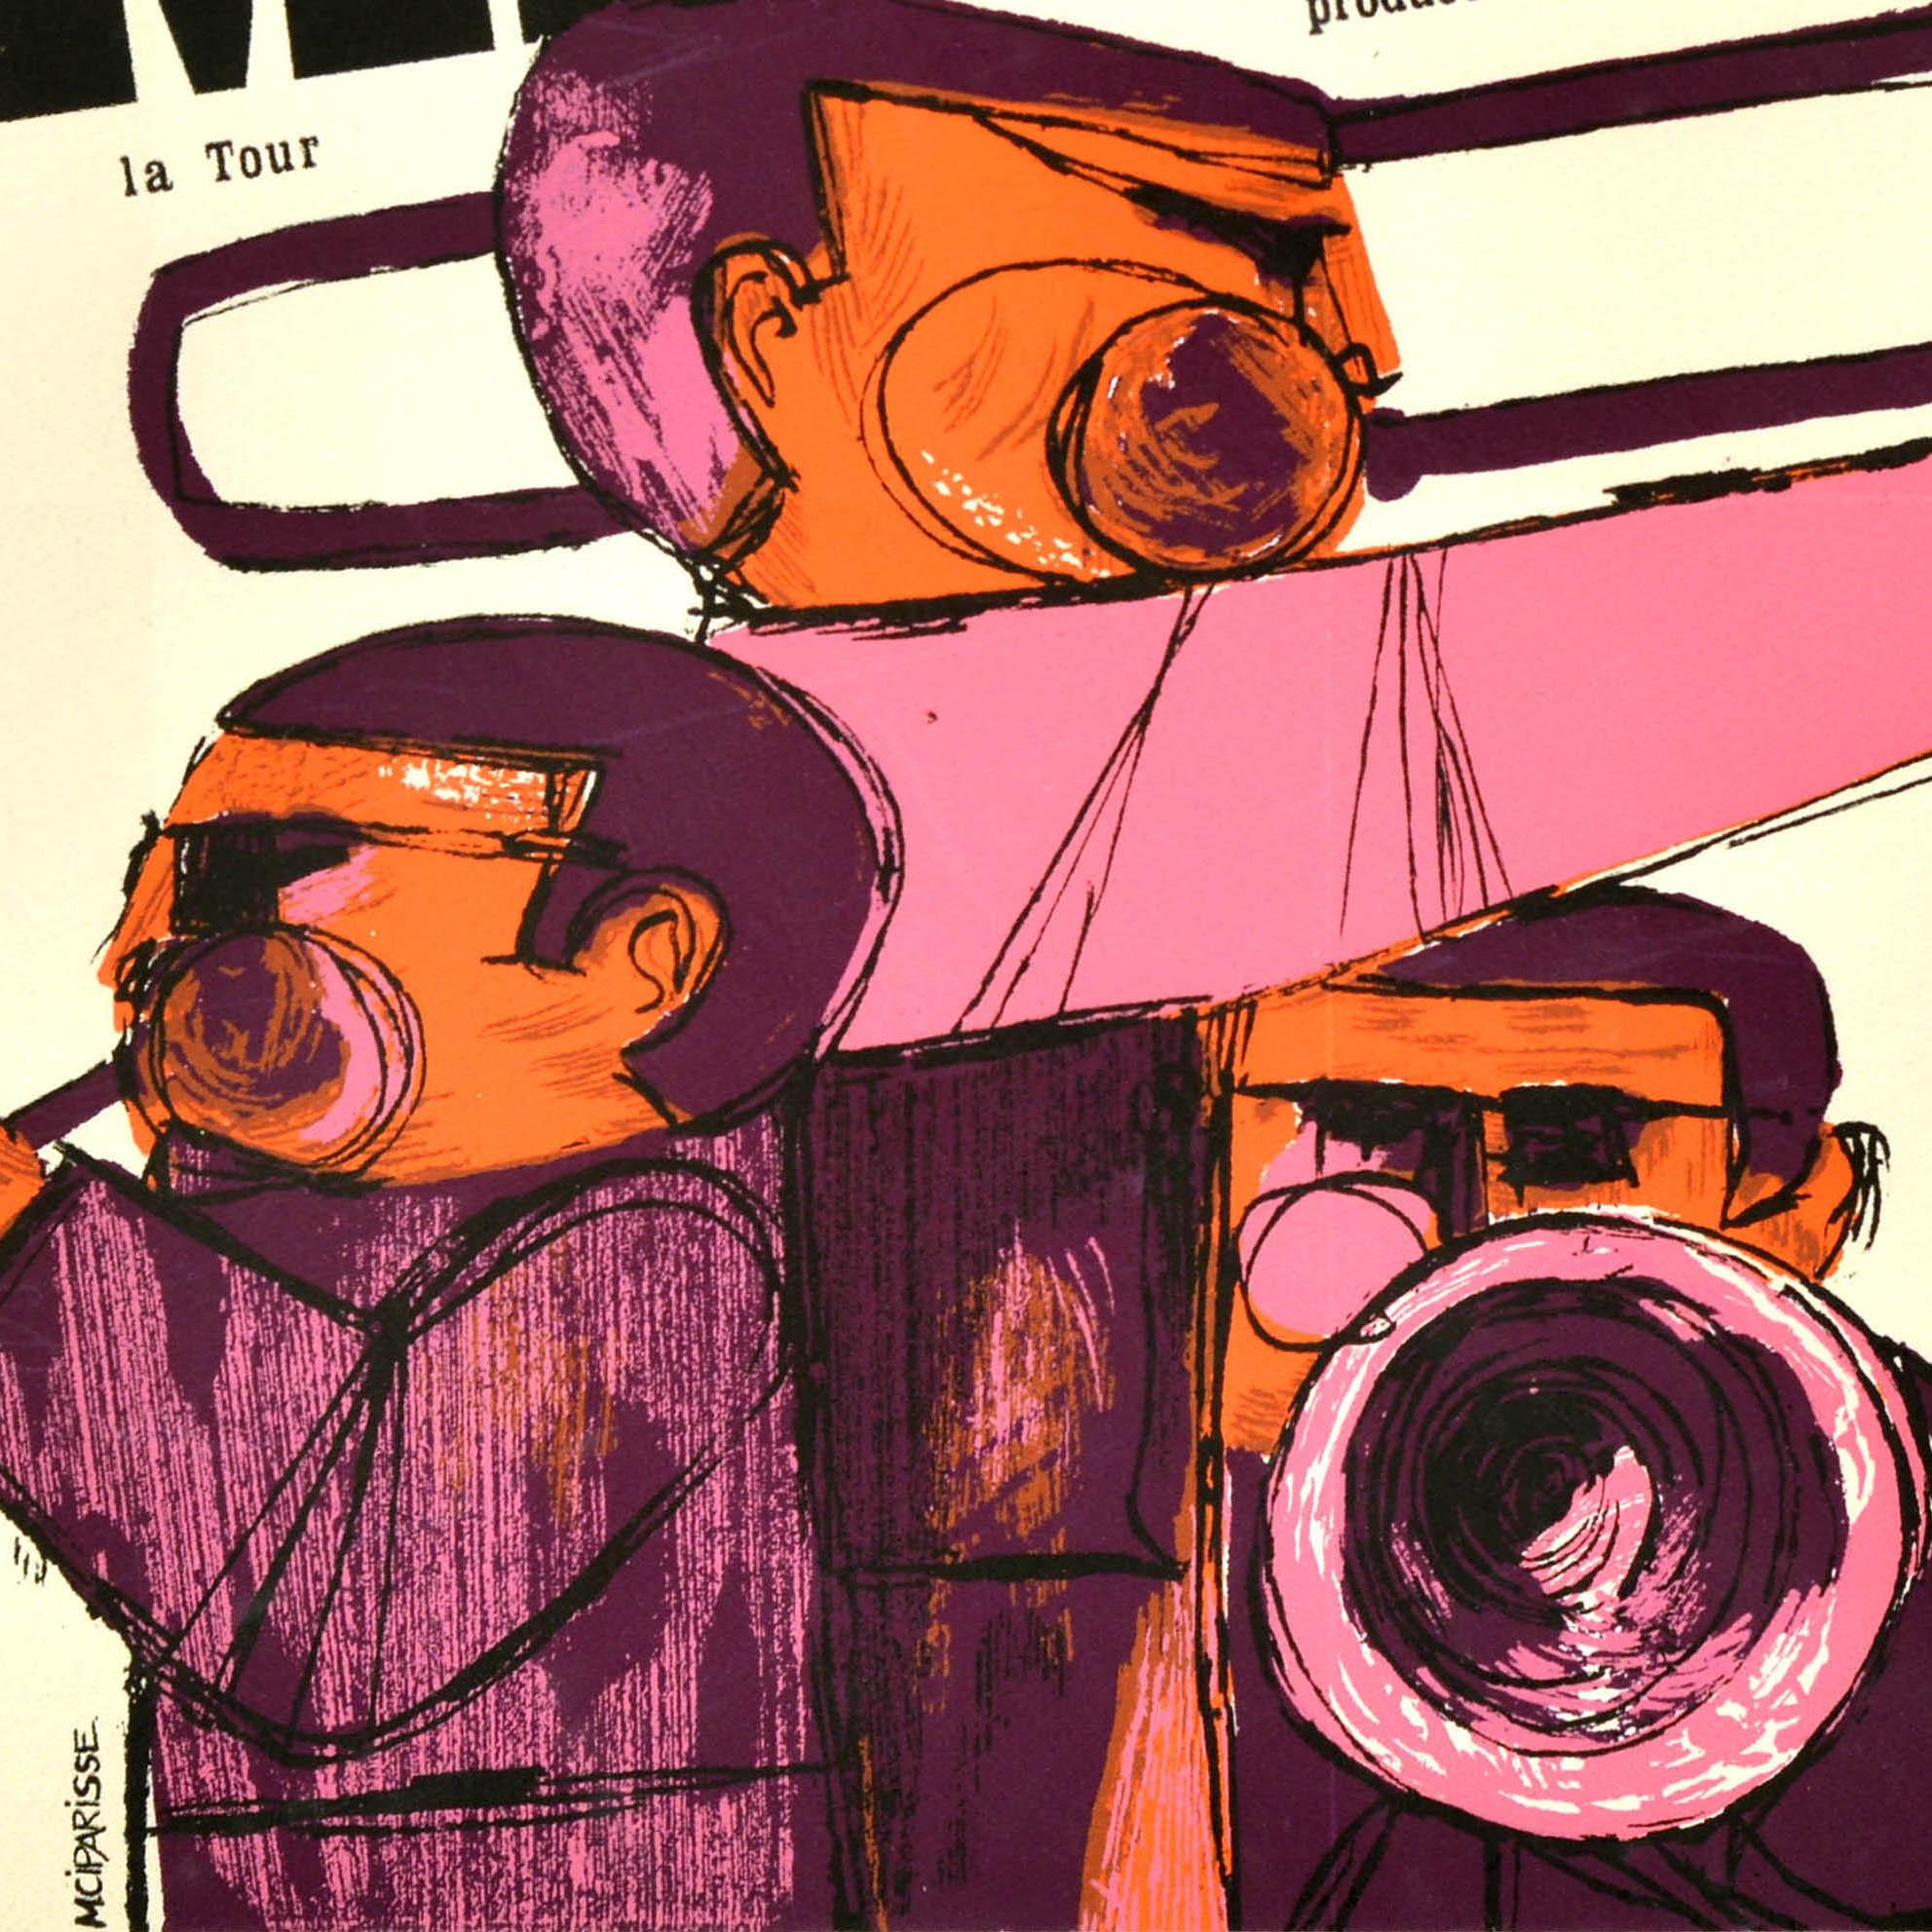 Original vintage music advertising poster for the Comblain 65 International Jazz Festival la tour produced by Joe Napoli held from 31 July to 1 August featuring a great illustration of three musicians playing trombone and trumpet brass instruments